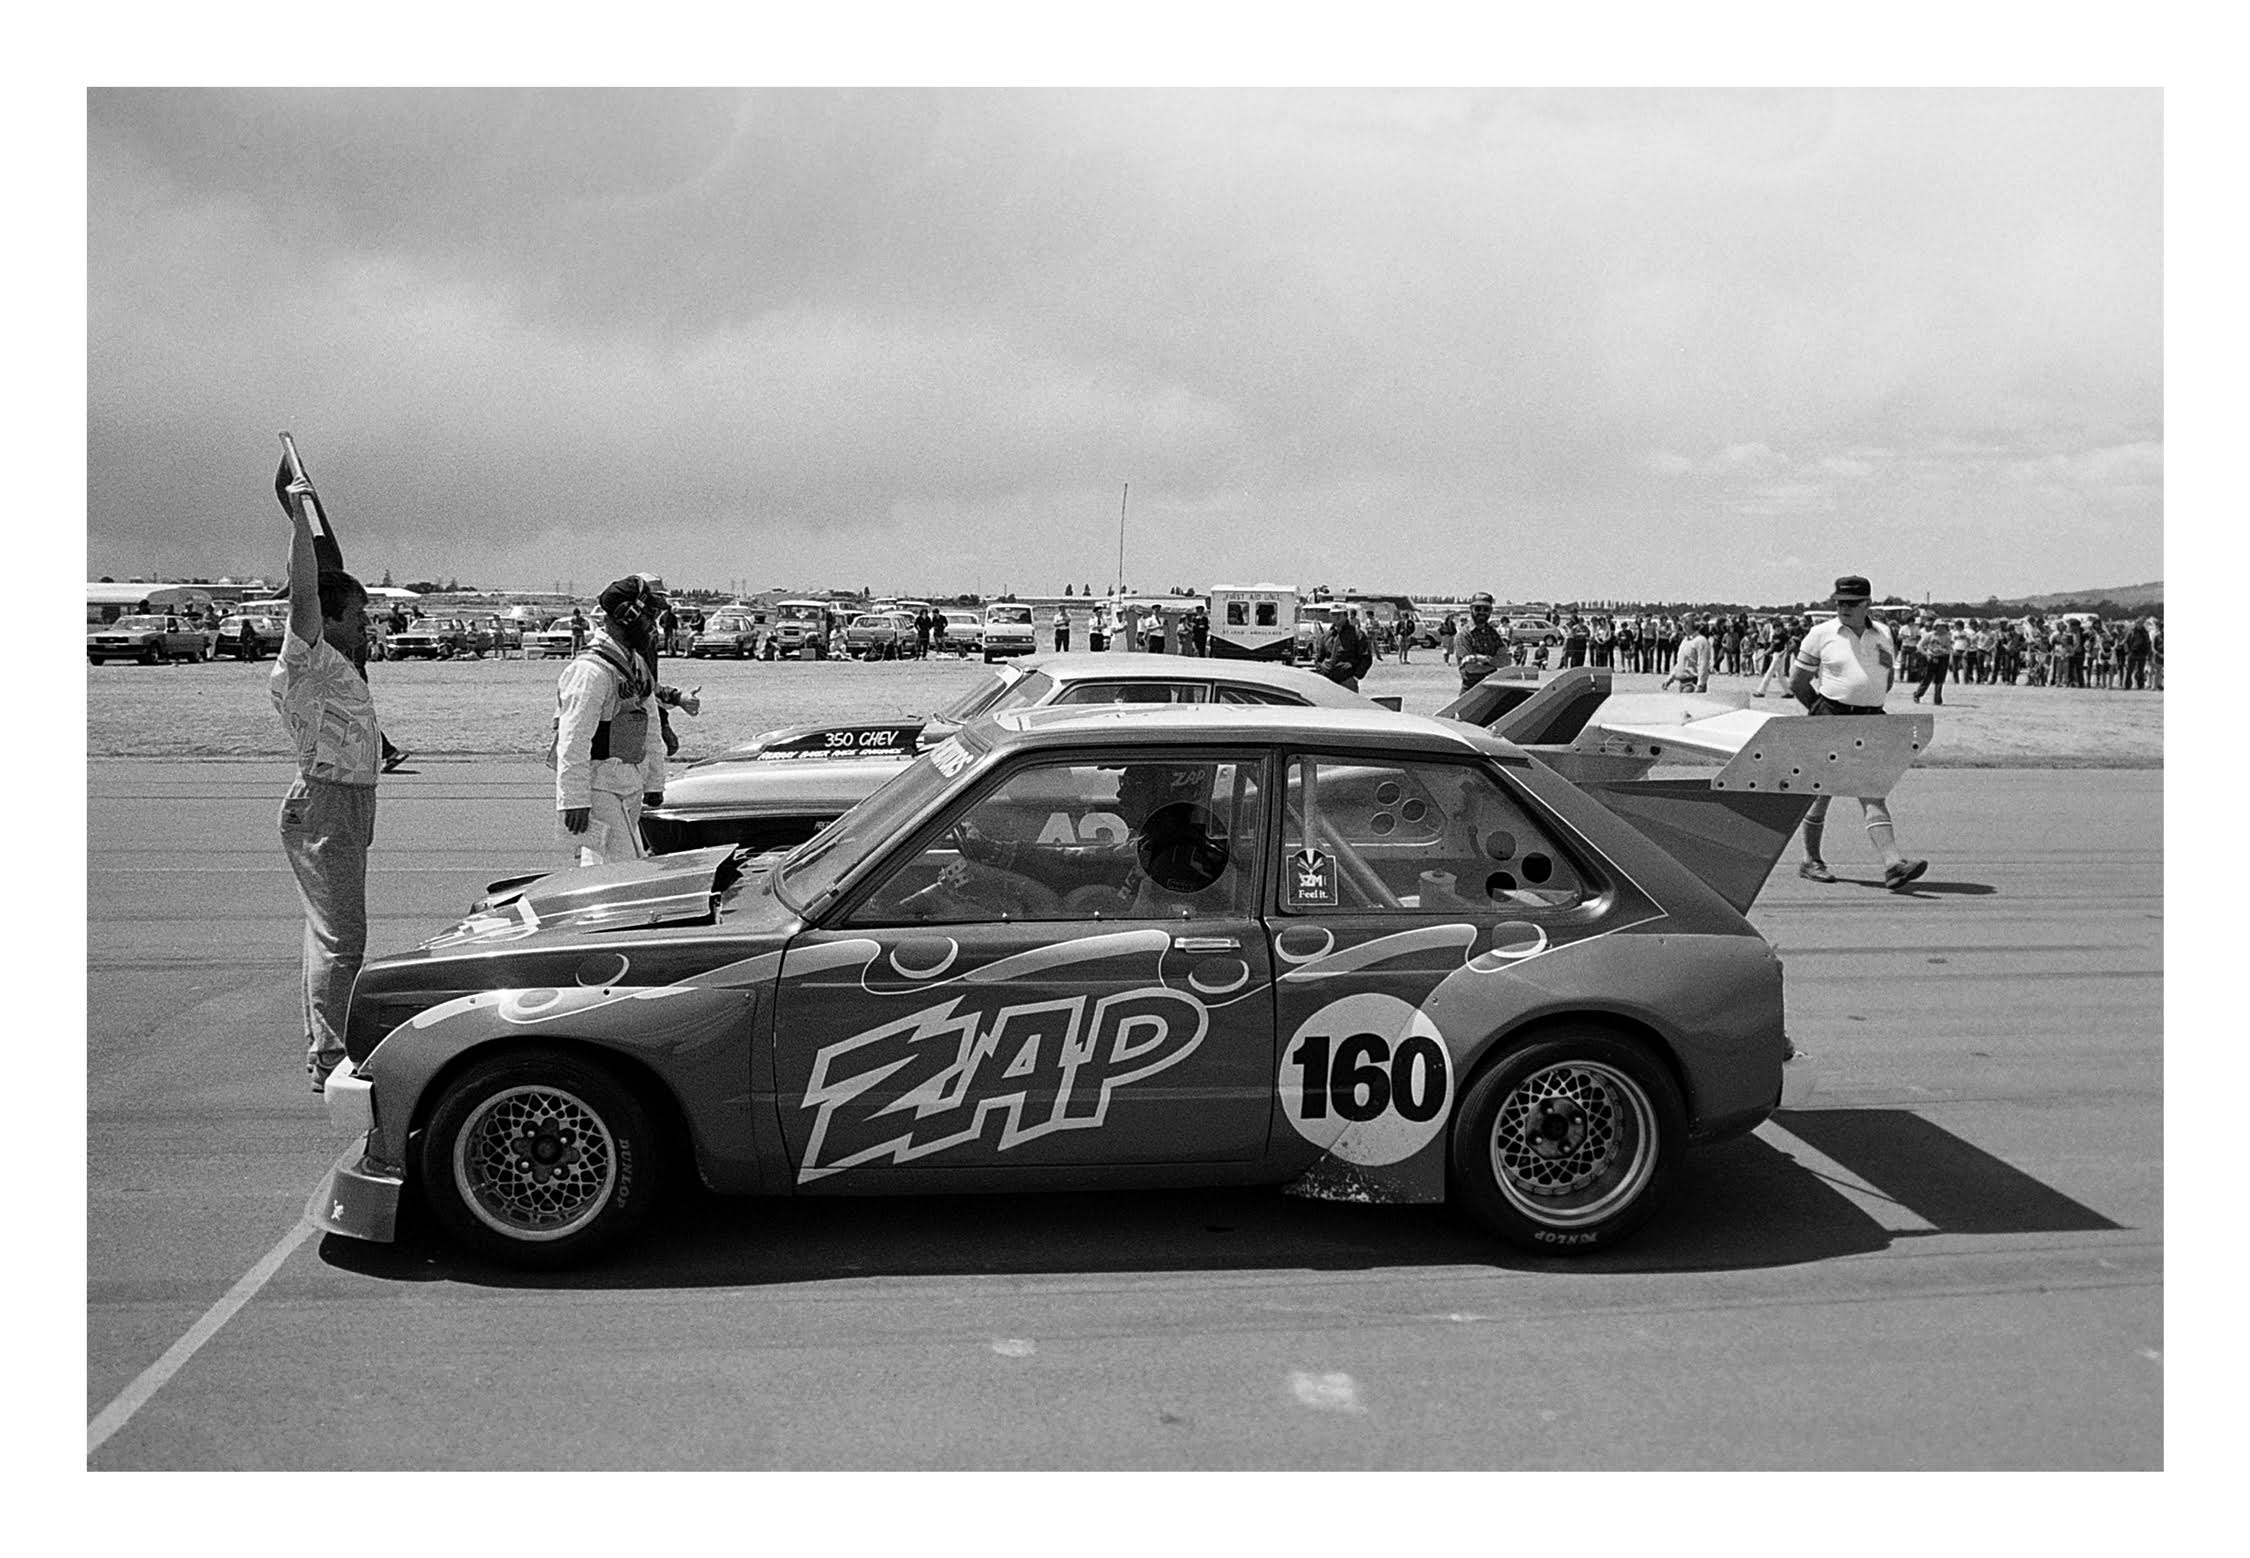 Wigram 1983. Trevor Crowe's V8 Oldsmobile powered Toyota Starlet in the foreground from Ian Munt and Inky Tulloch. IMAGE/terry marshall